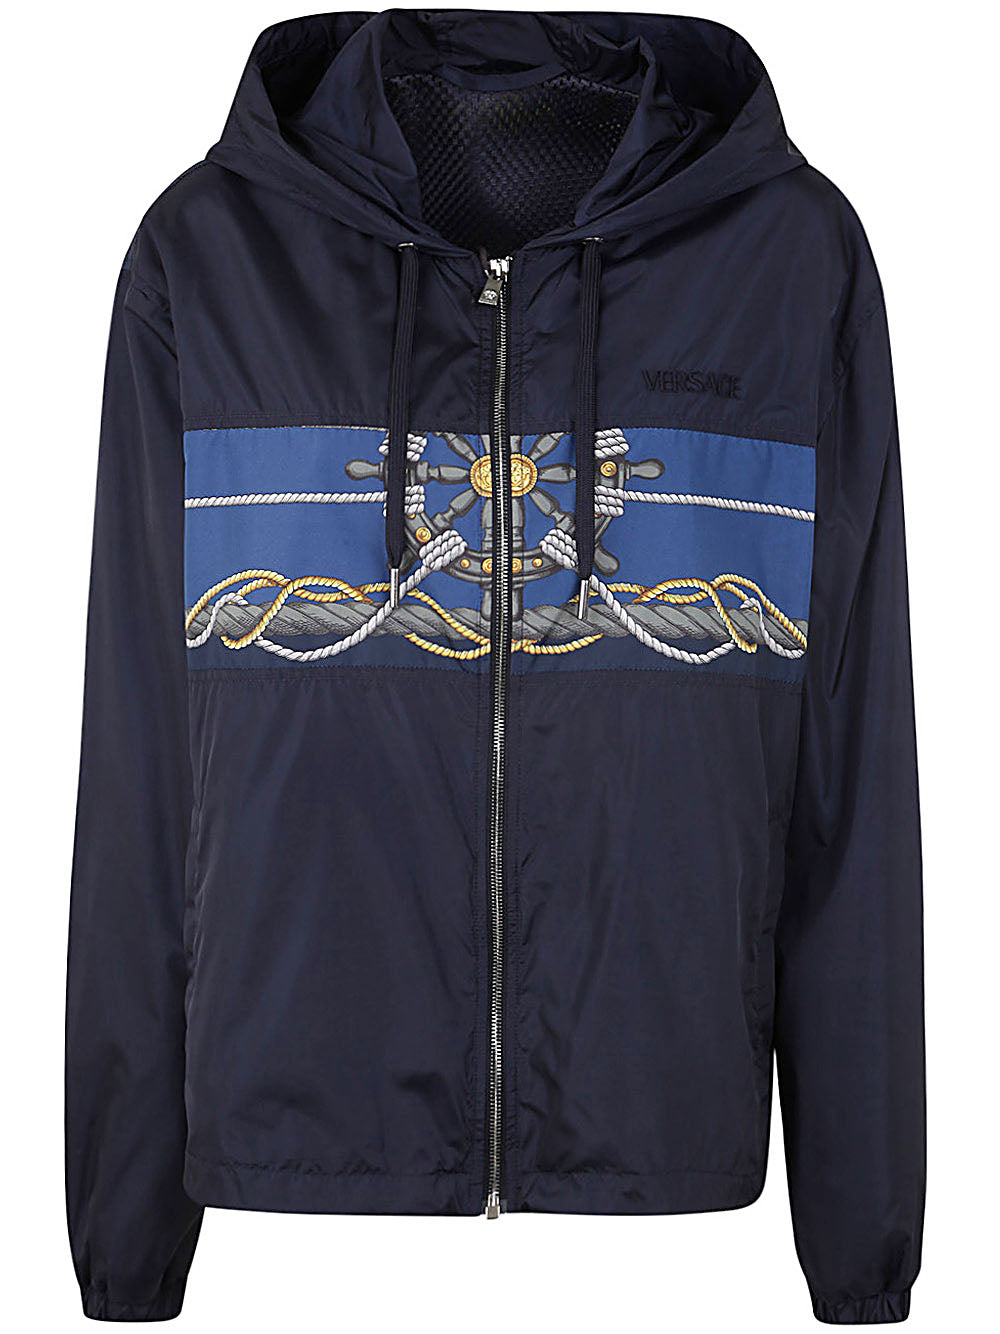 Blouson Technical Fabric And Poly Twill With Versace Nautical Print + Versace Writing Embroidery